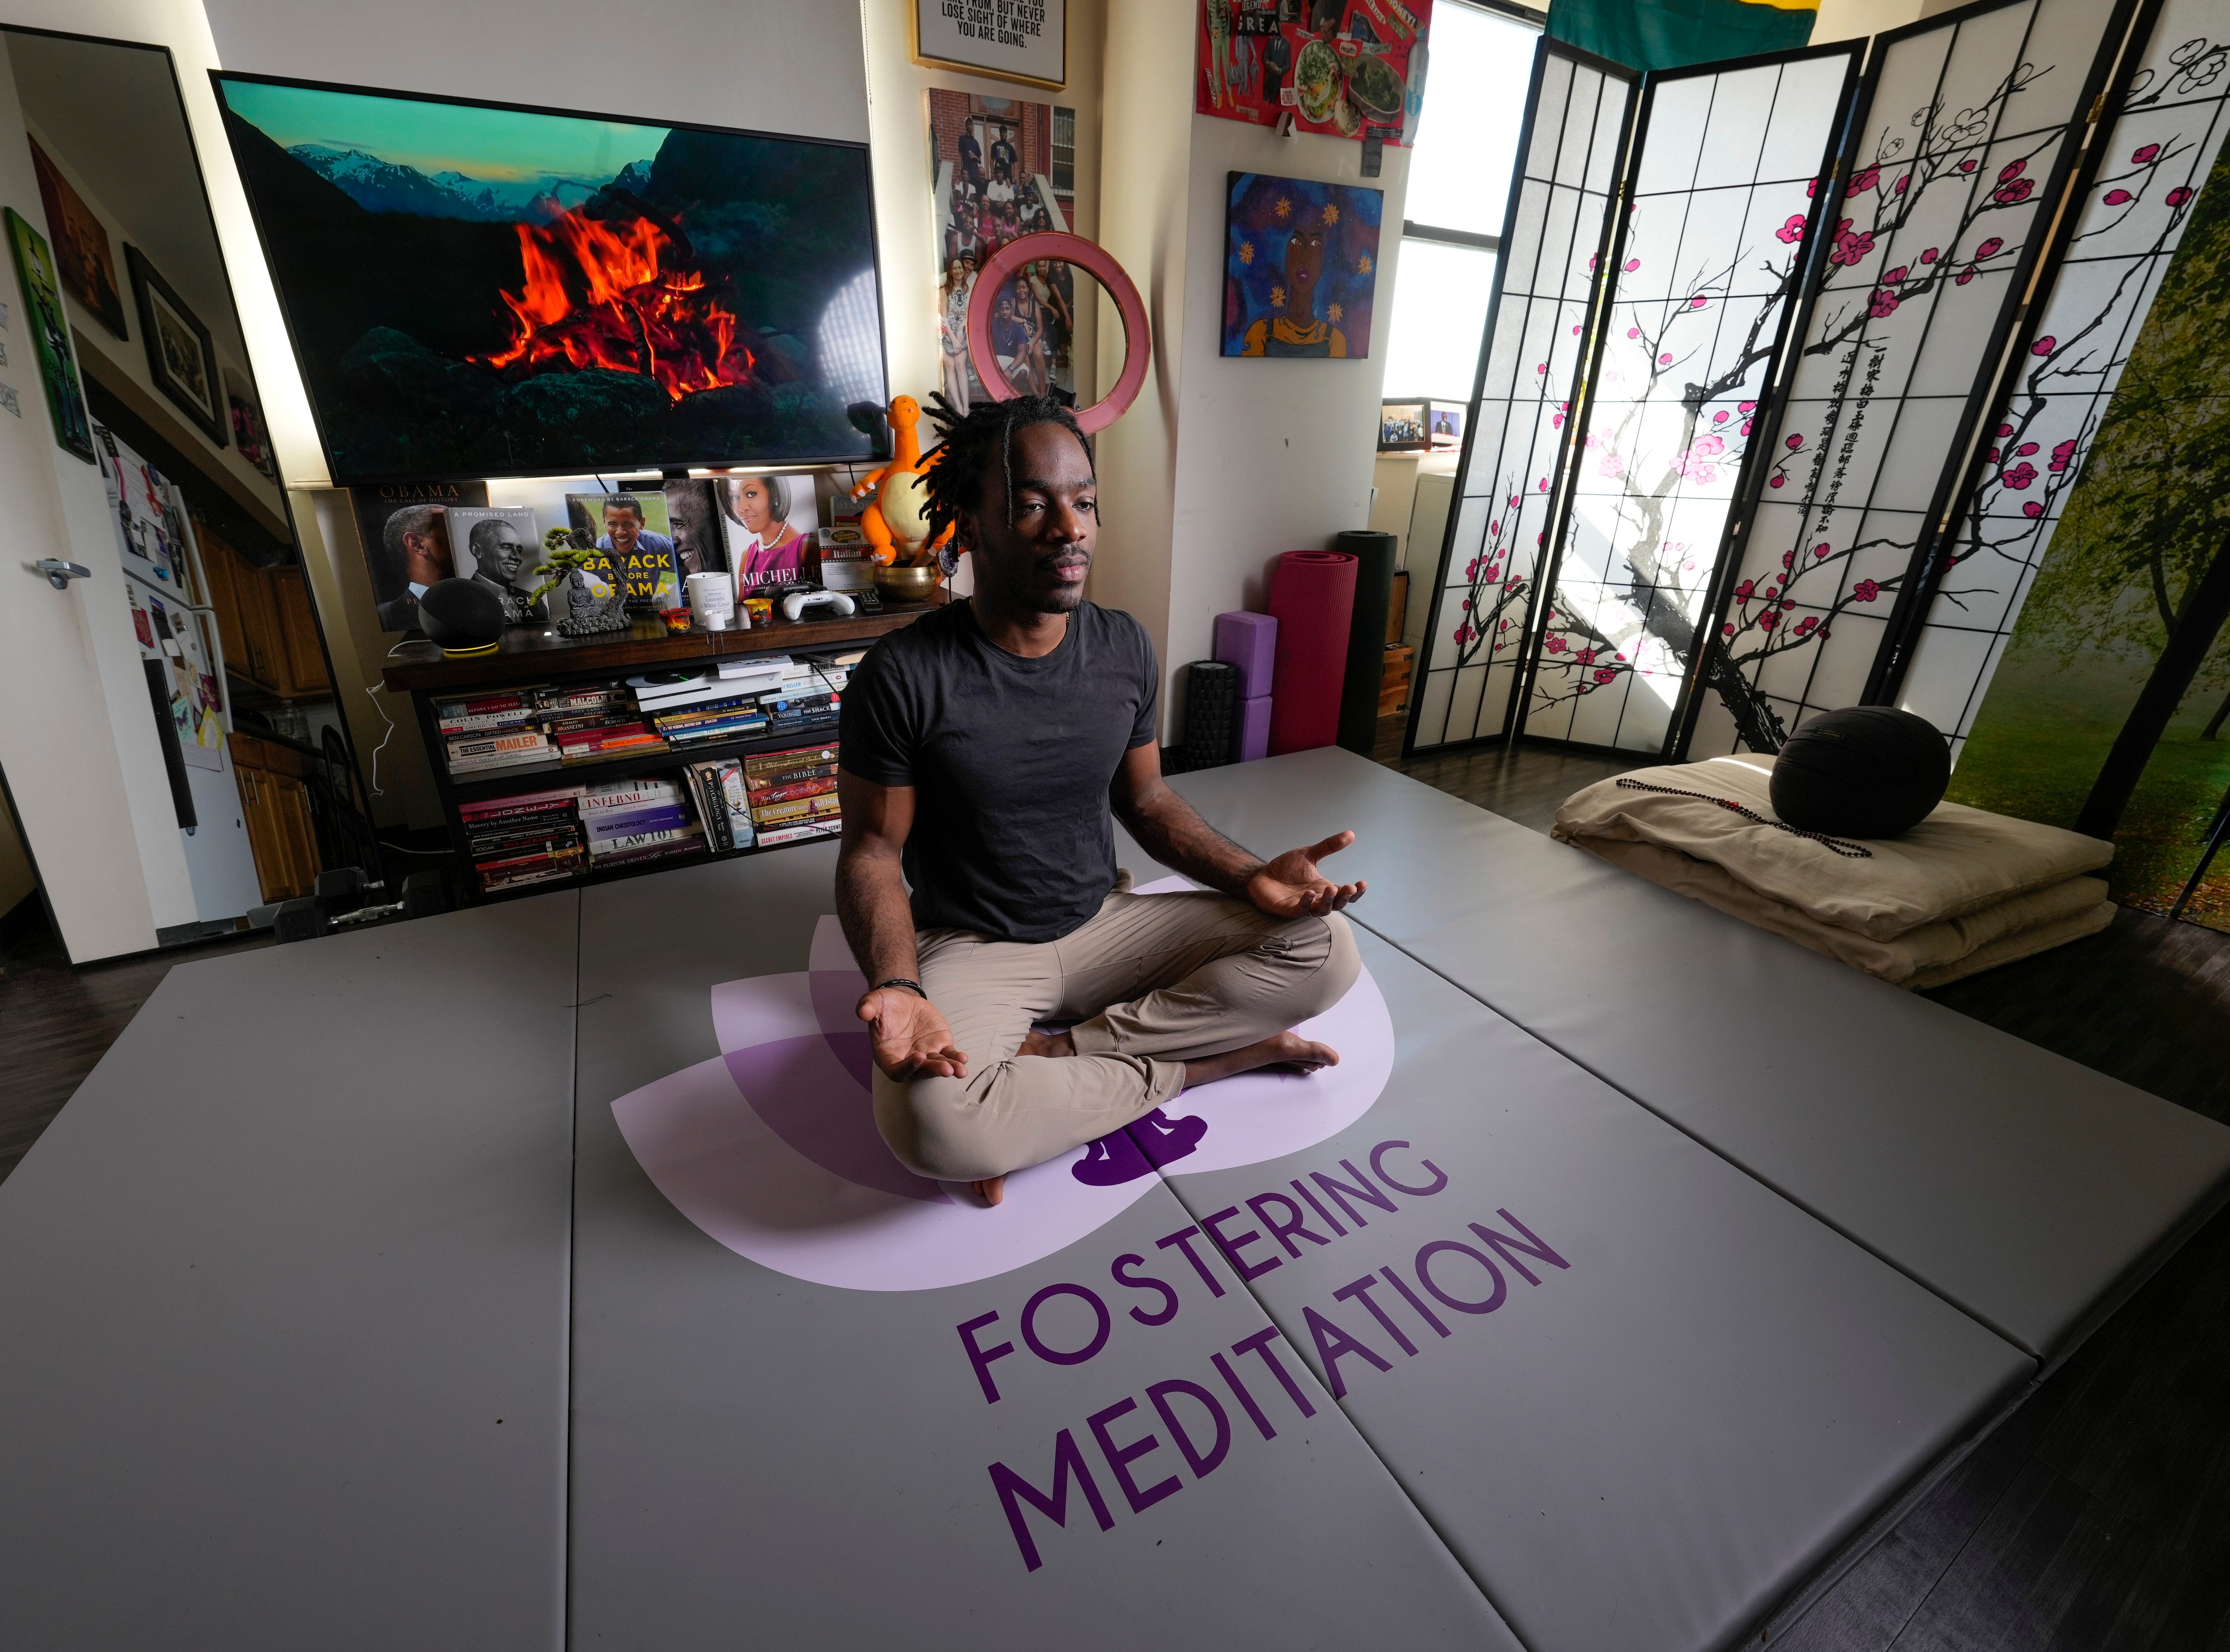 Demetrius Napolitano launched Fostering Meditation, a nonprofit organization to help youth in foster care heal from past trauma and adverse life experiences.